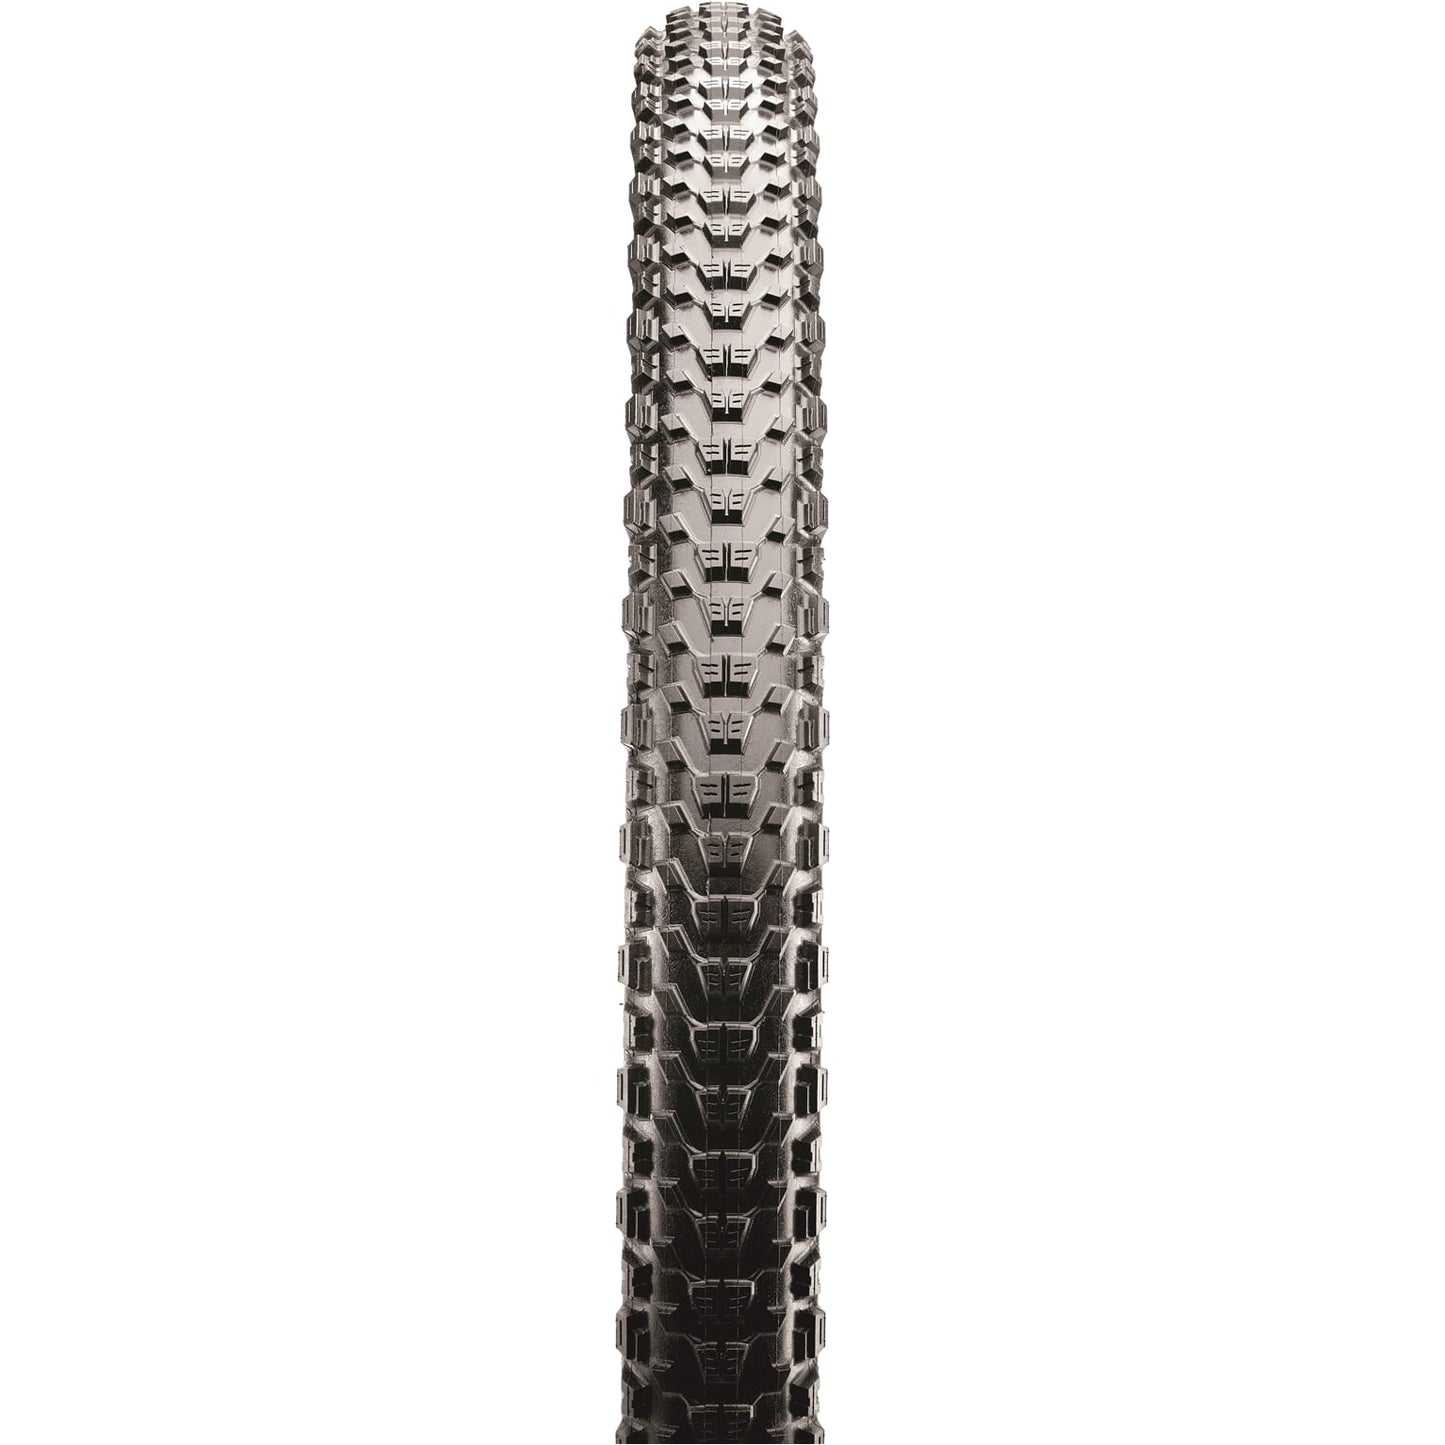 Maxxis Tire Ardent Race 29 x 2,20 volte